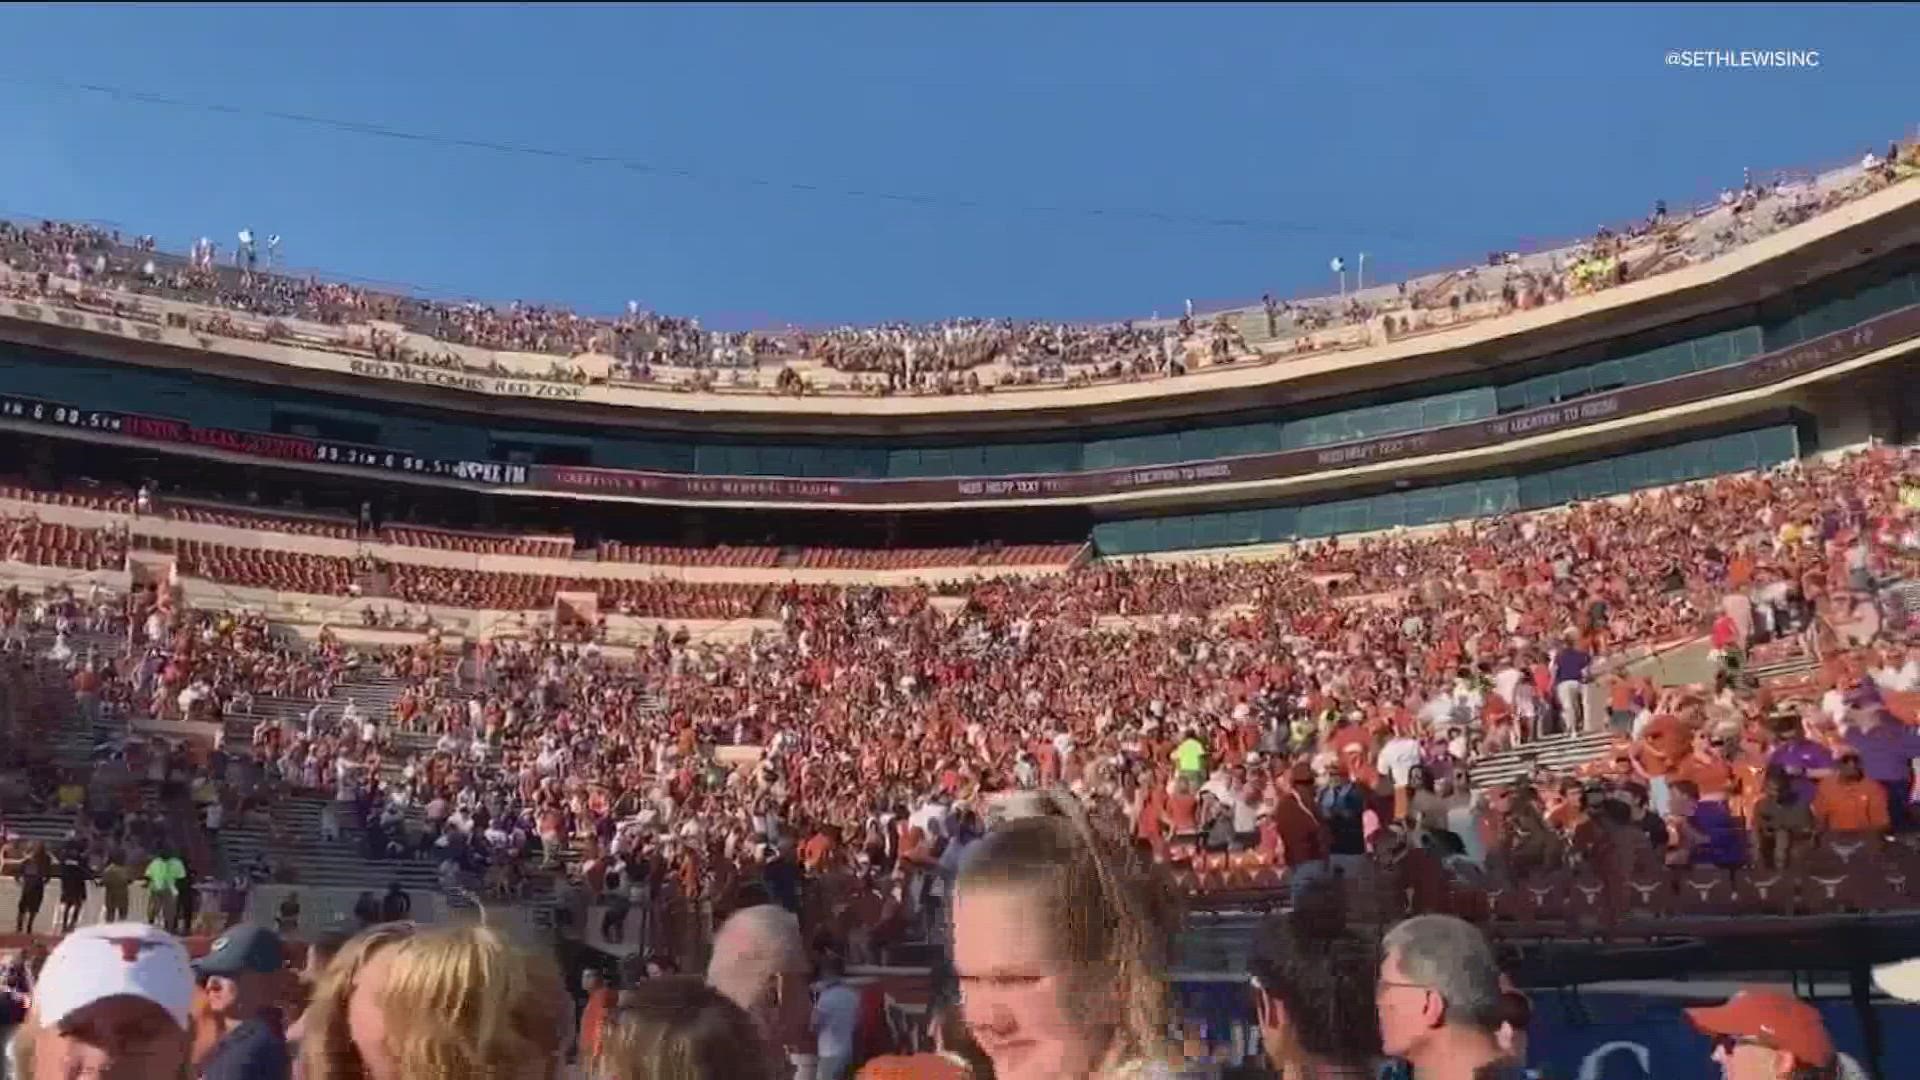 The band would have been sitting in the upper northeast corner of DKR Texas Memorial Stadium.